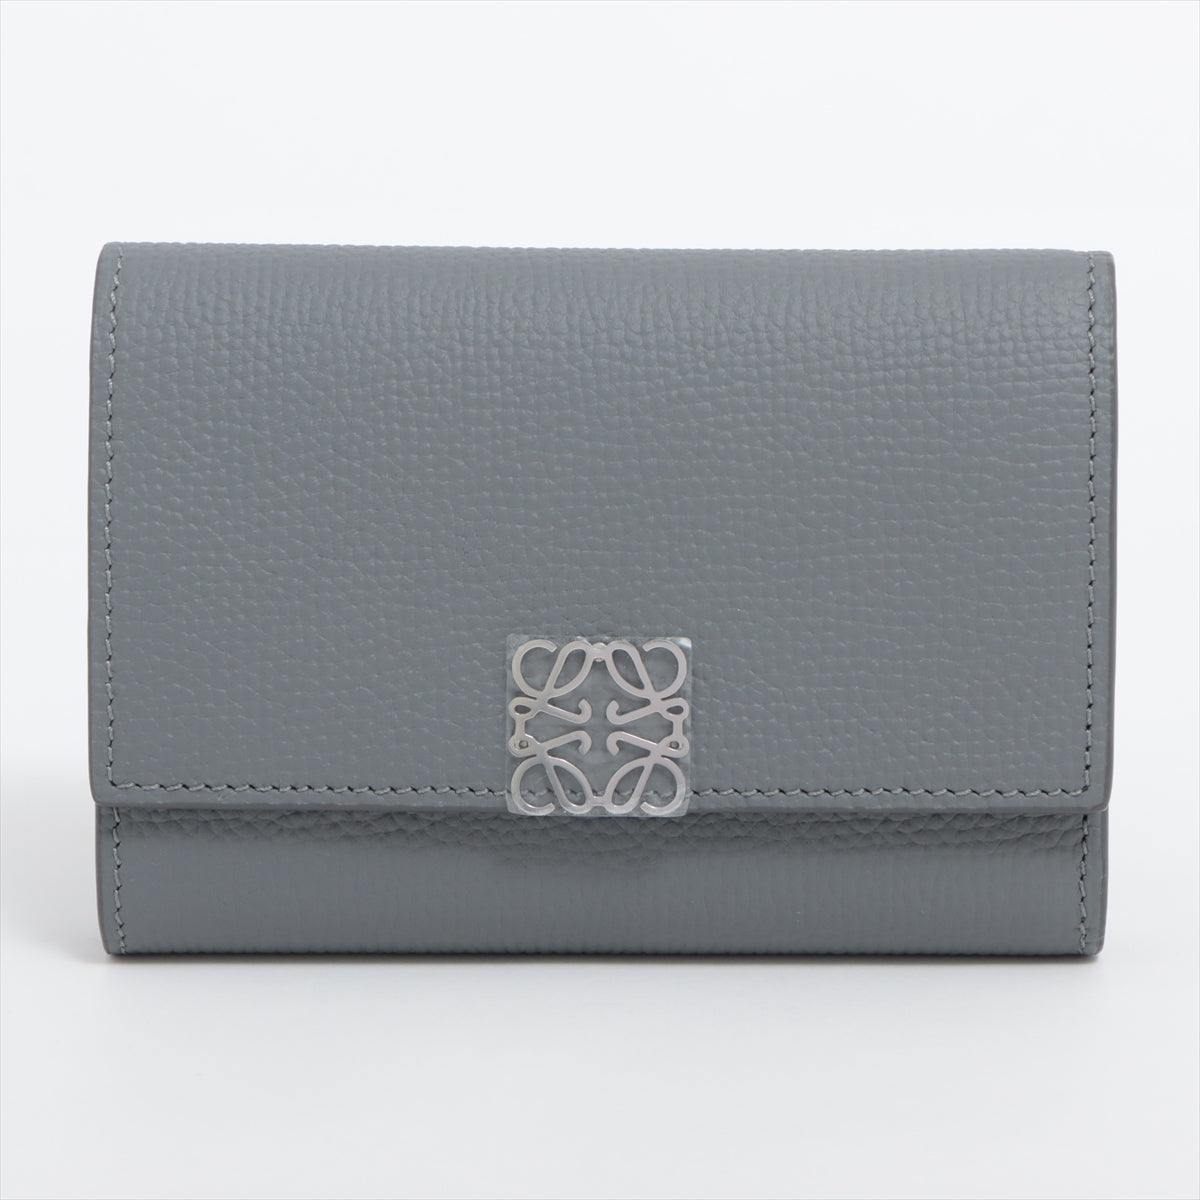 Loewe Anagram Small Vertical Wallet Leather Compact Wallet Grey